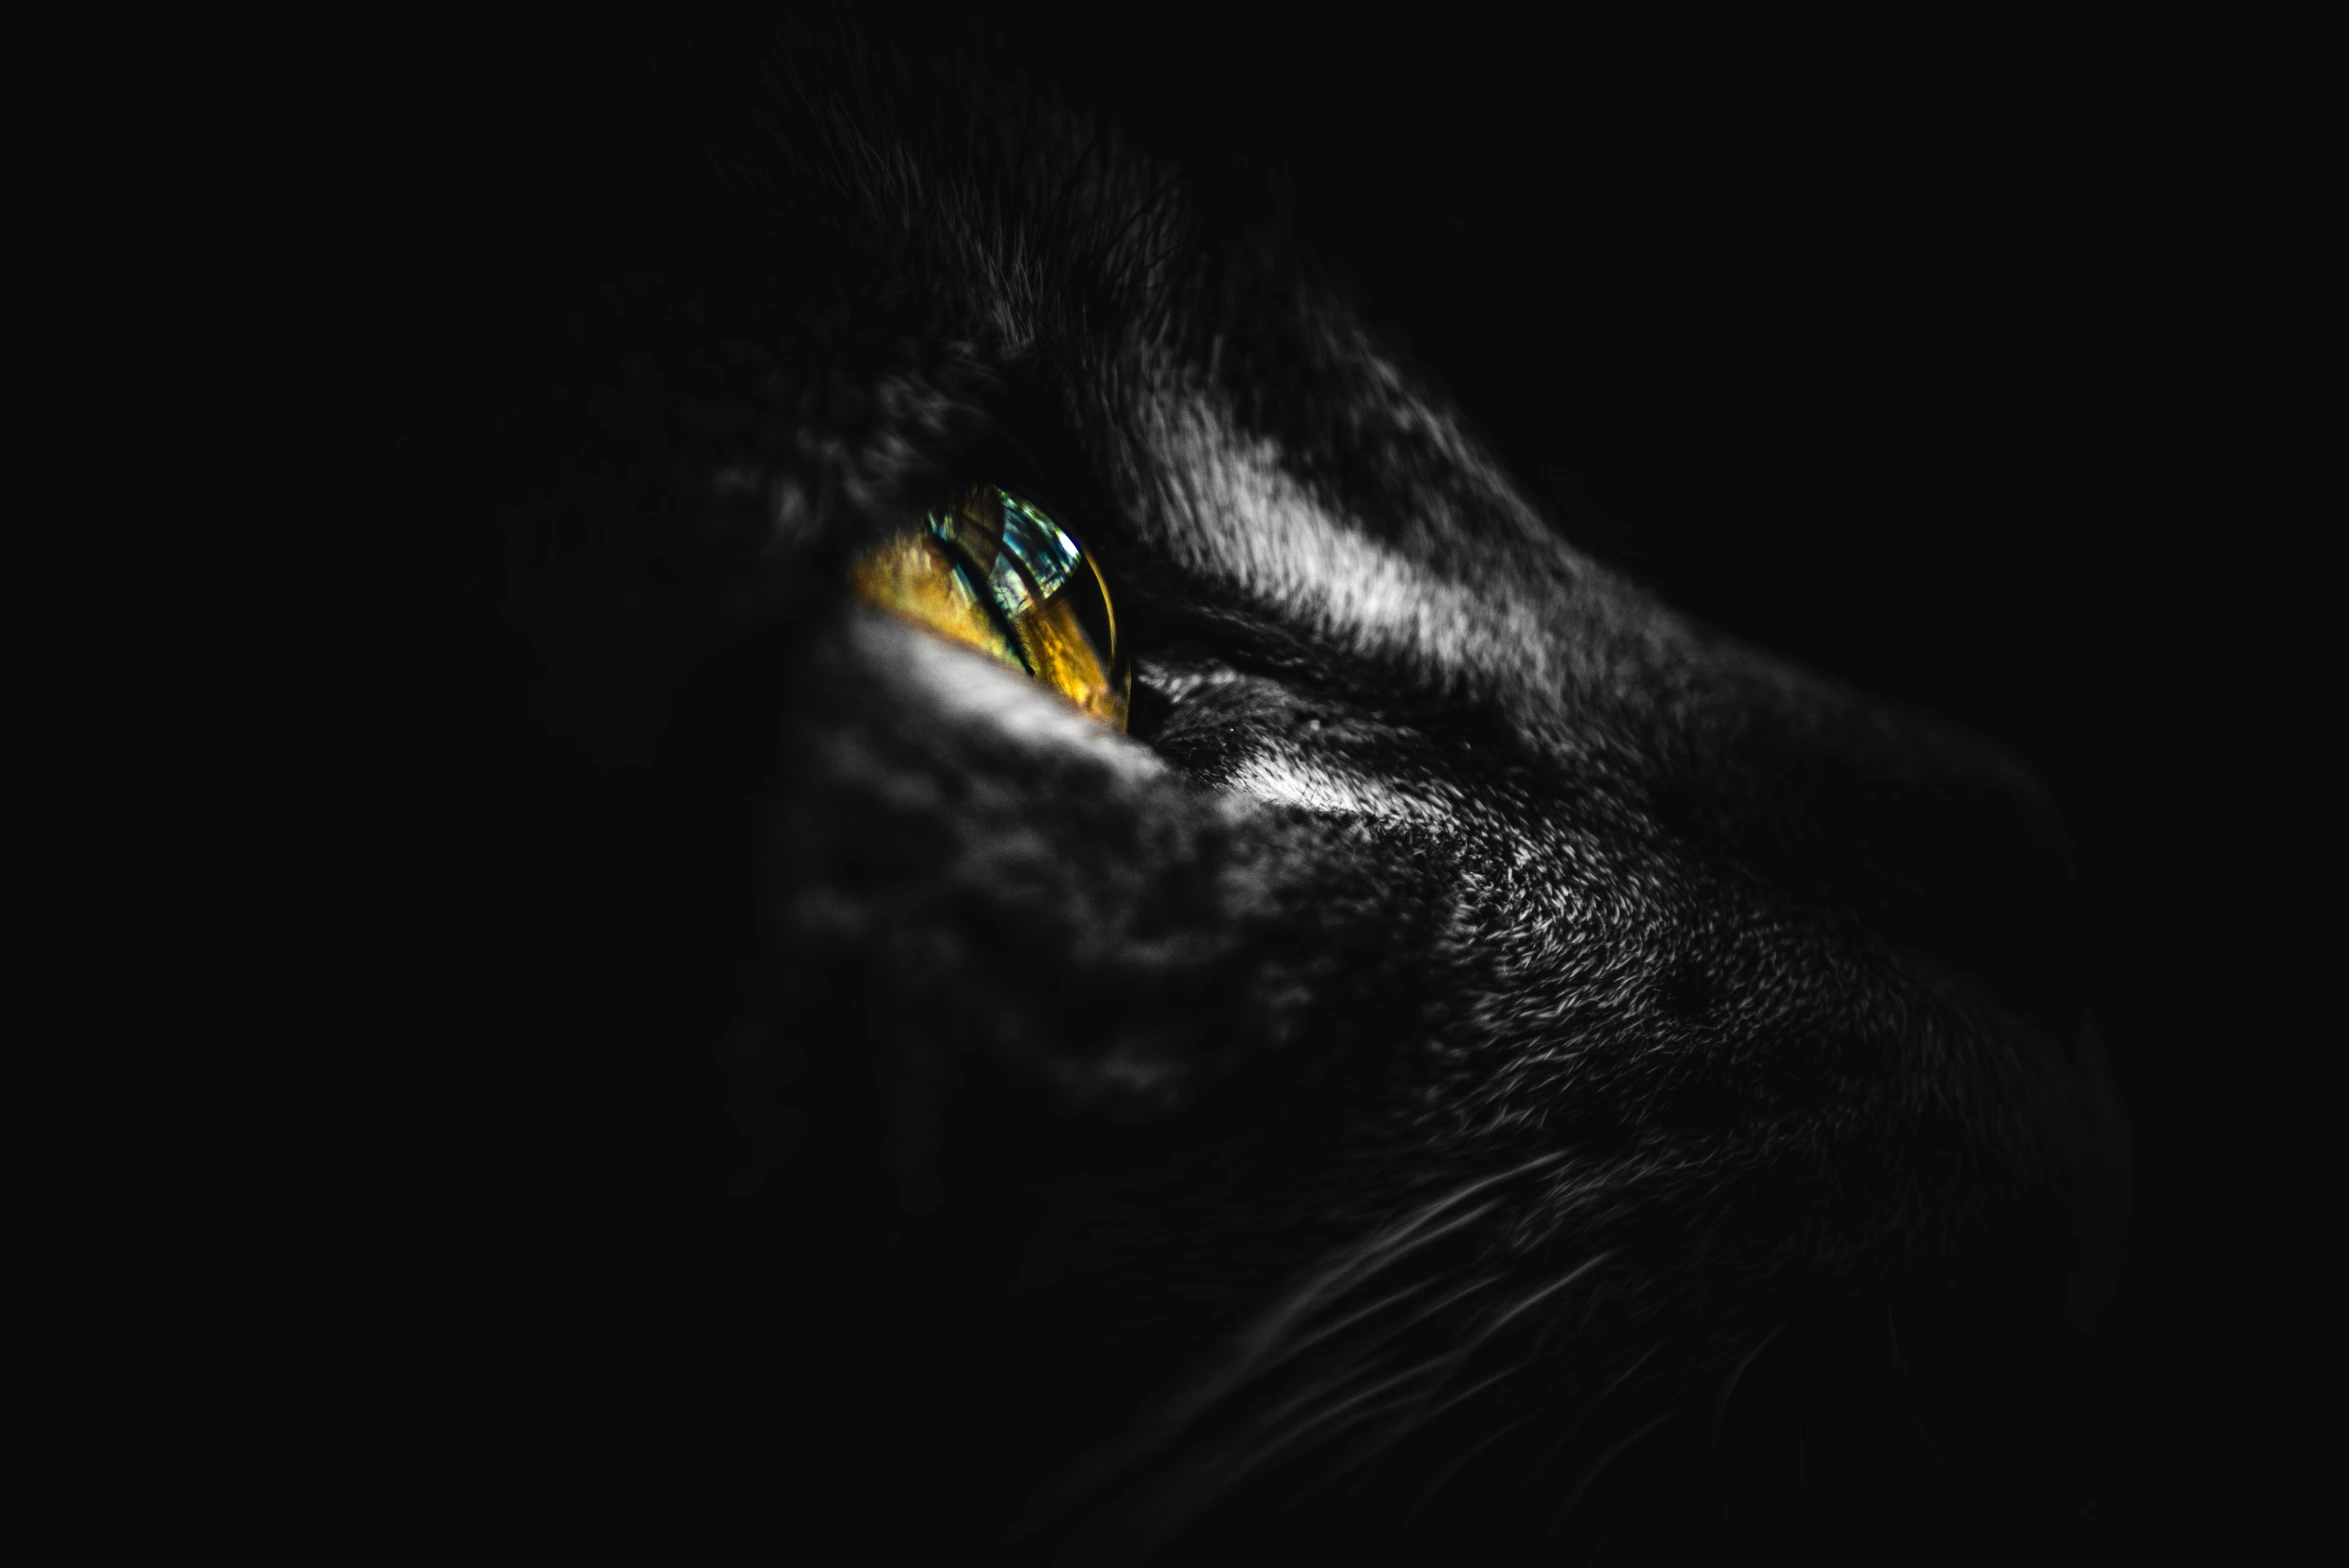 the black cat has green and yellow eyes